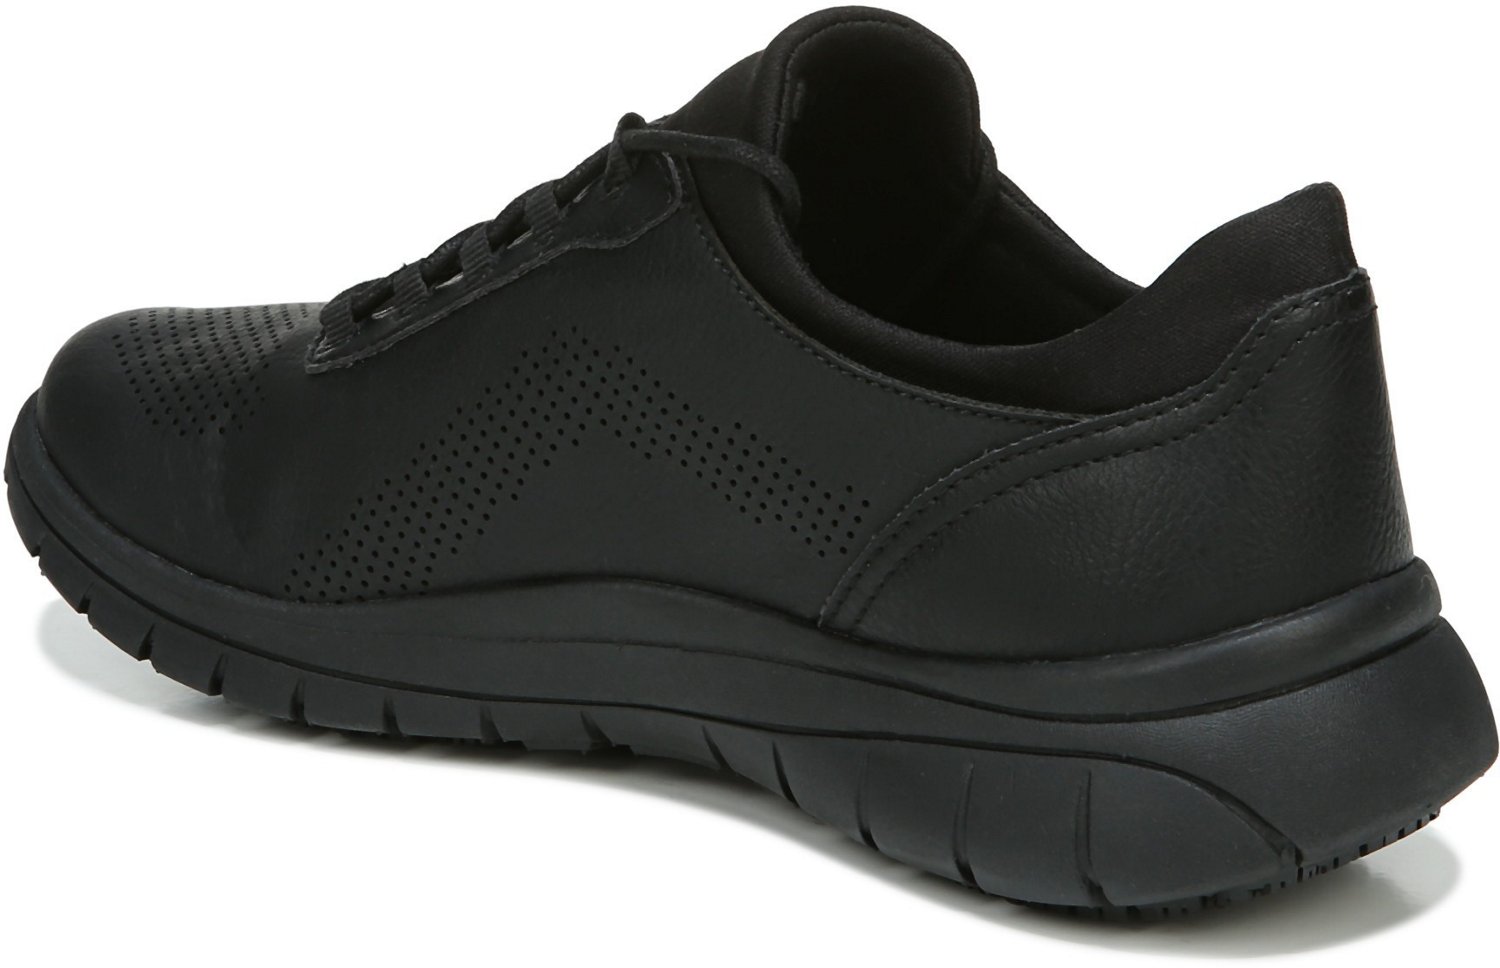 Dr. Scholl's Women's Visionary Shoes | Free Shipping at Academy